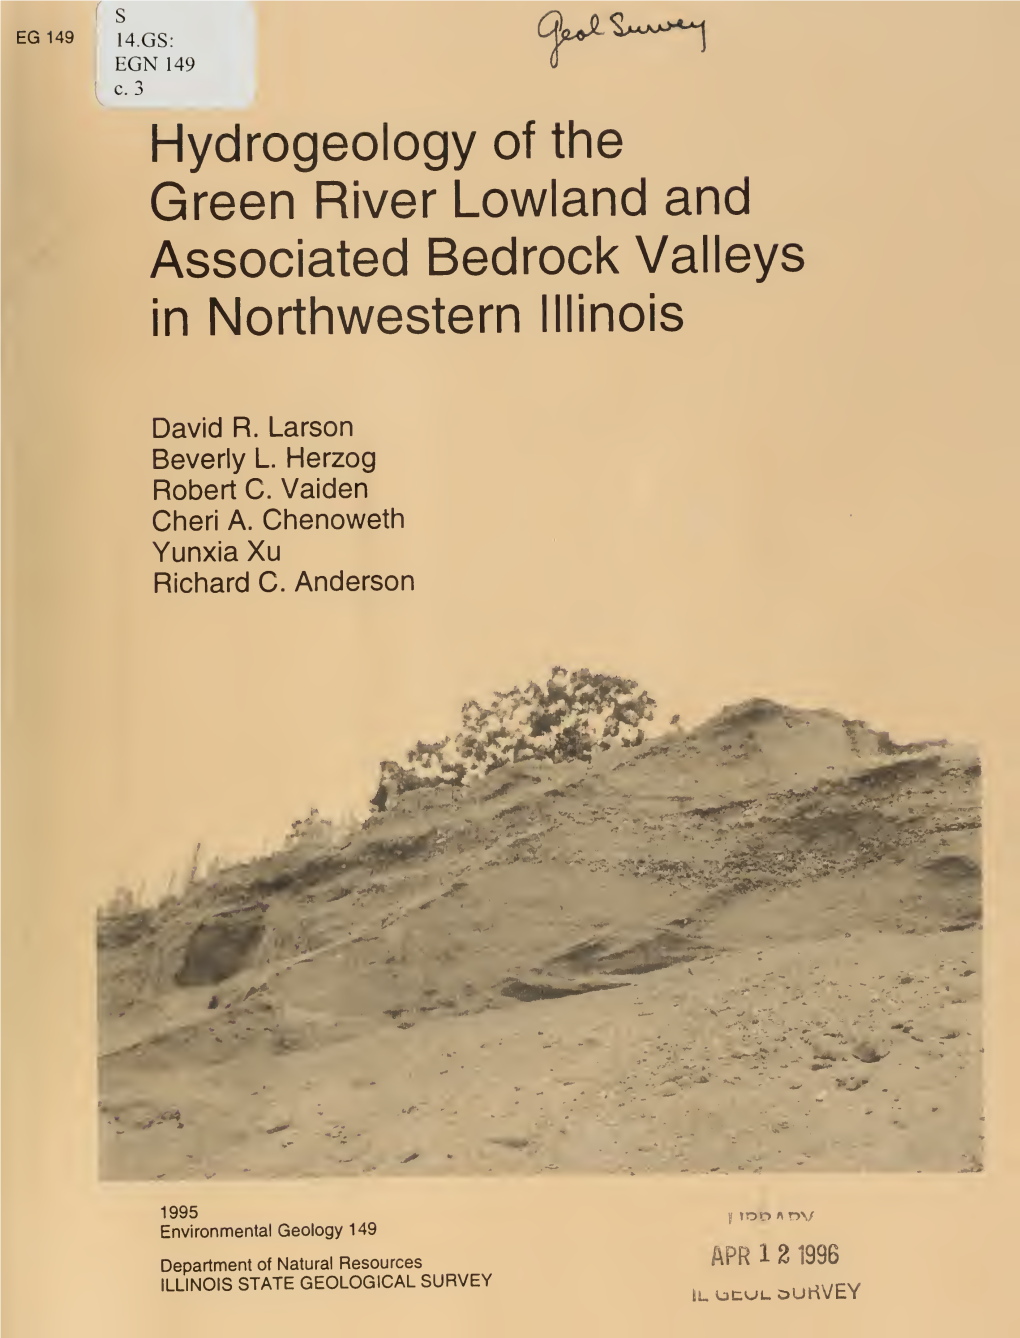 Hydrogeology of the Green River Lowland and Associated Bedrock Valleys in Northwestern Illinois